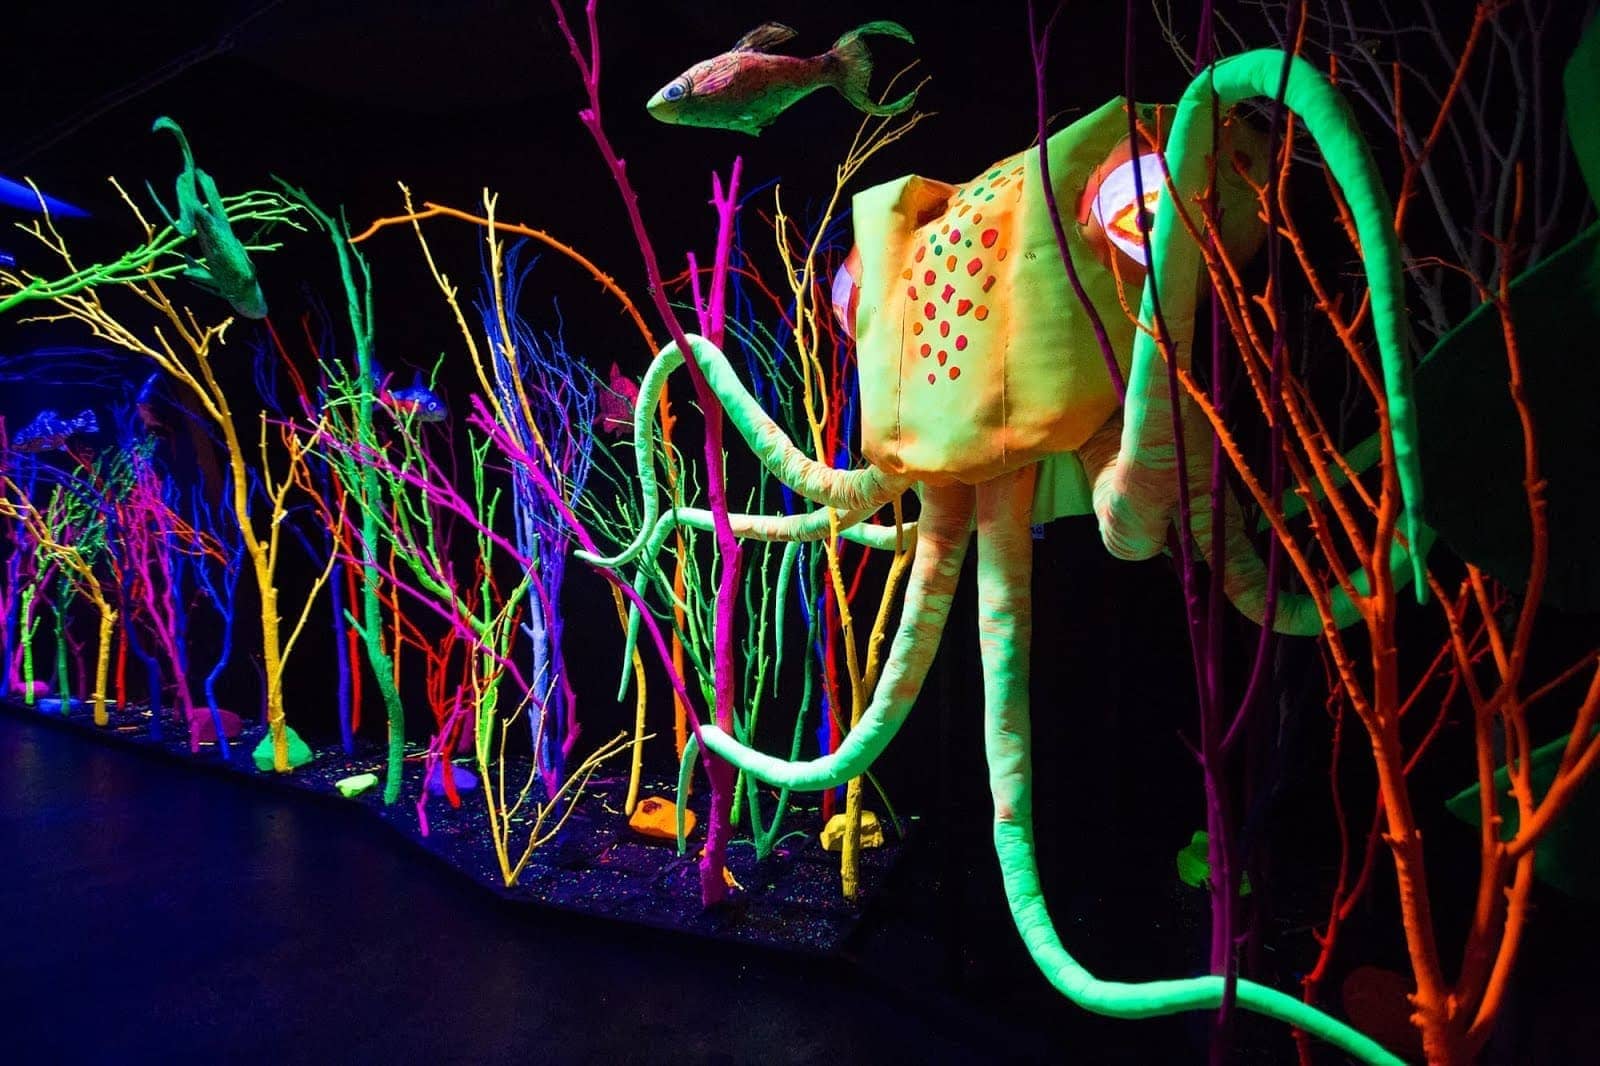 Meow Wolf Santa Fe New Mexico by Laurence Norah-5